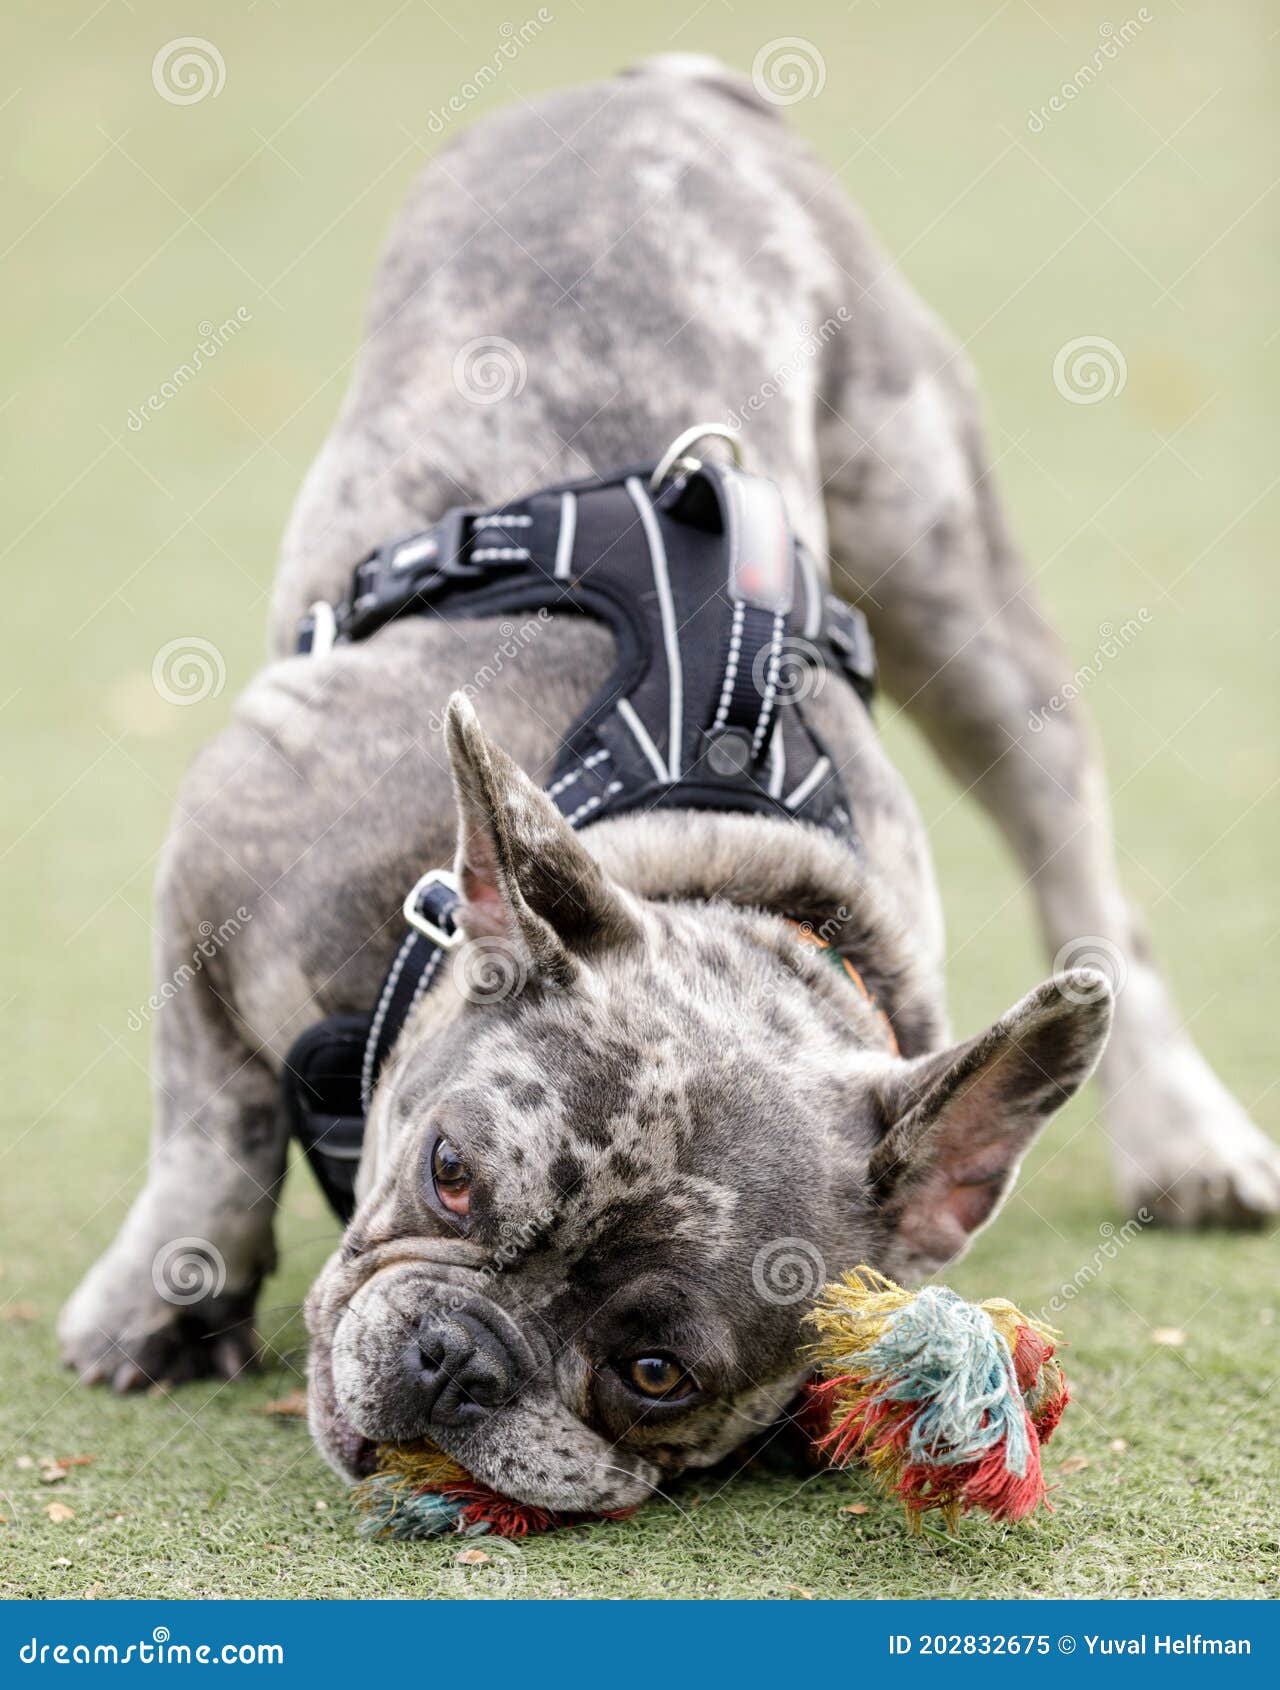 7-month-old blue merle male puppy french bulldog chewing knot rope toy